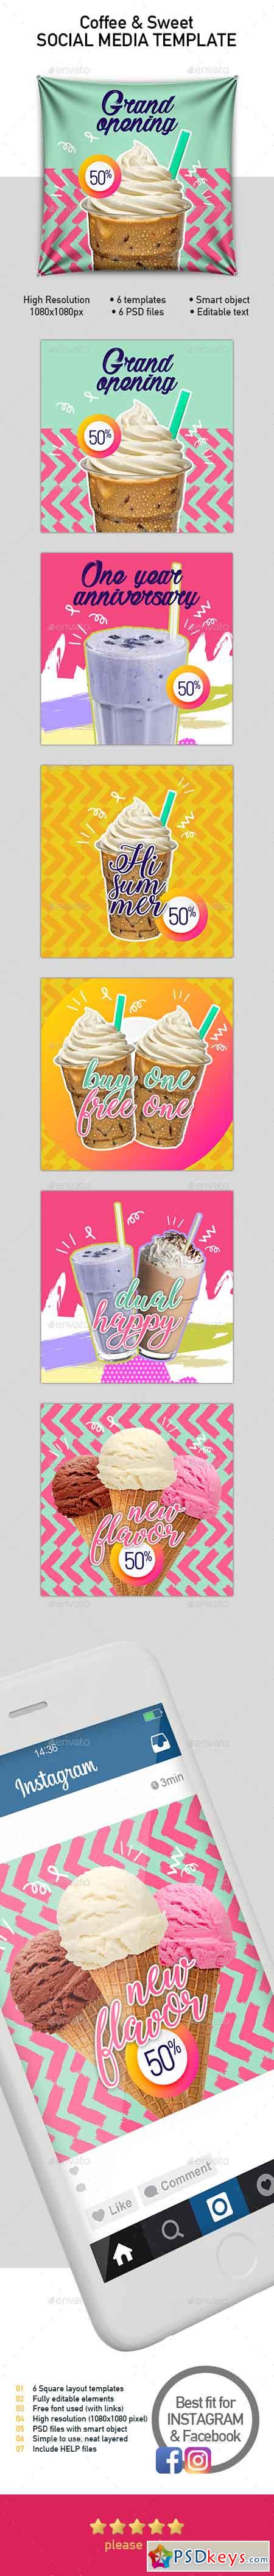 Set 6 Instagram Templates for Food and Drinks Business 20238514